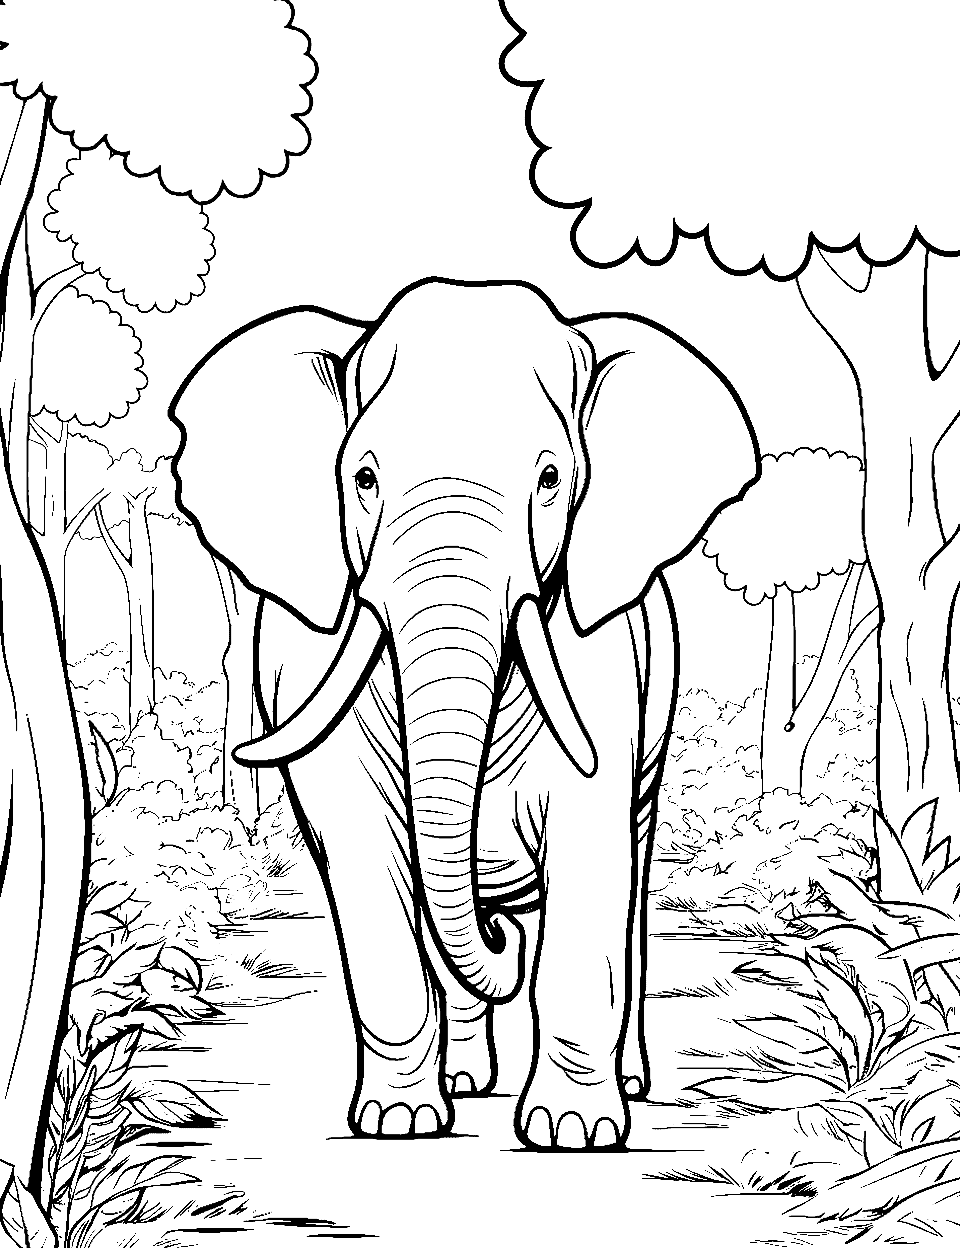 Elephants - Free printable Coloring pages for kids